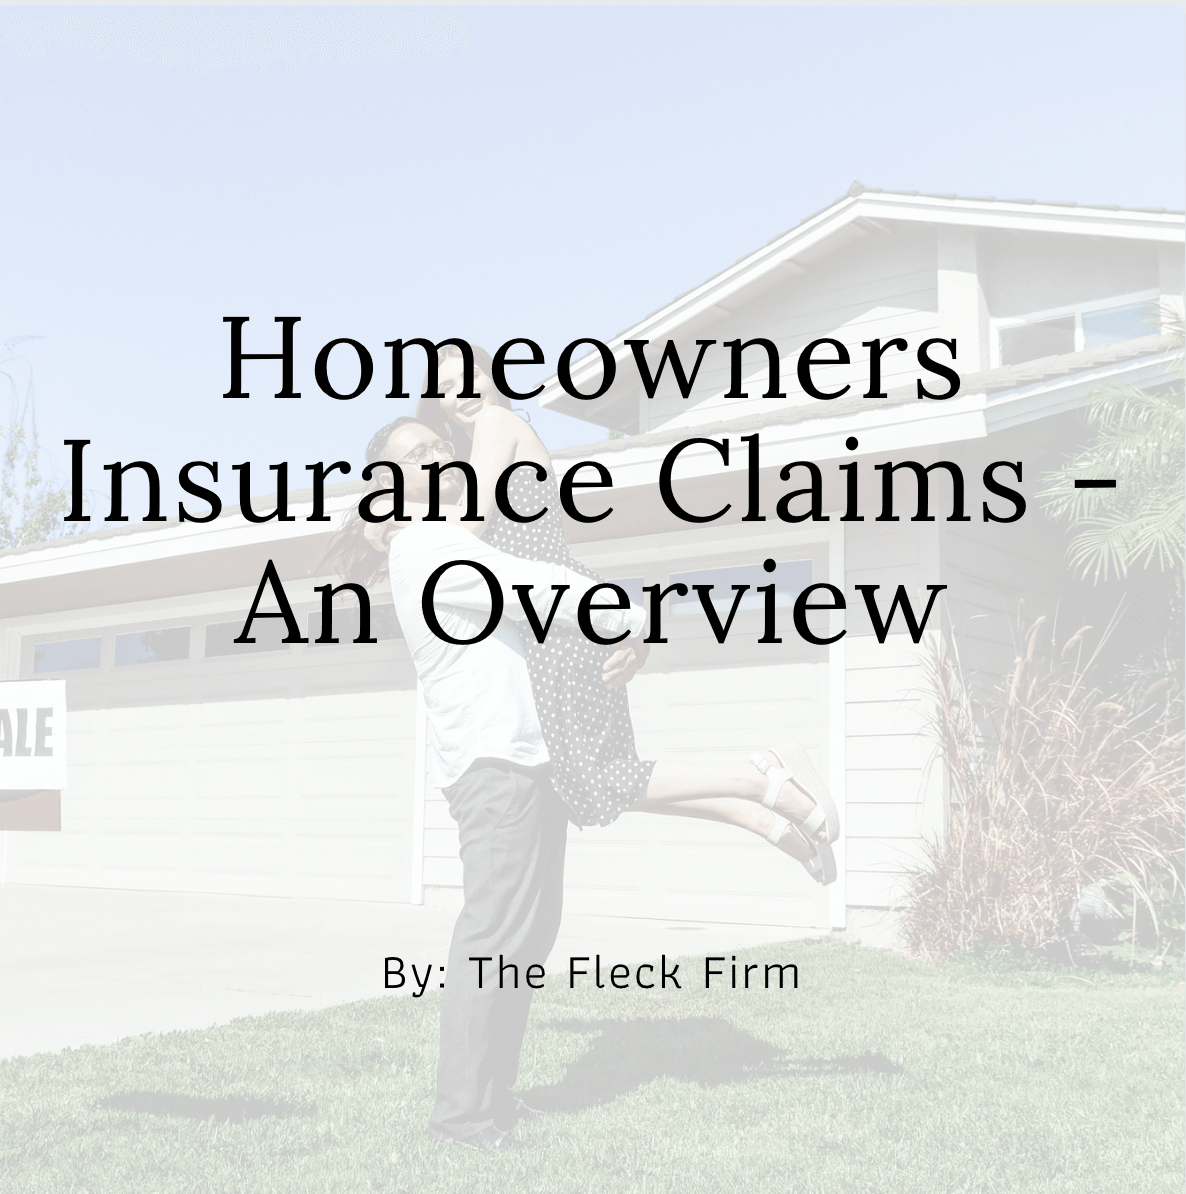 Legal overview of homeowners insurance claims